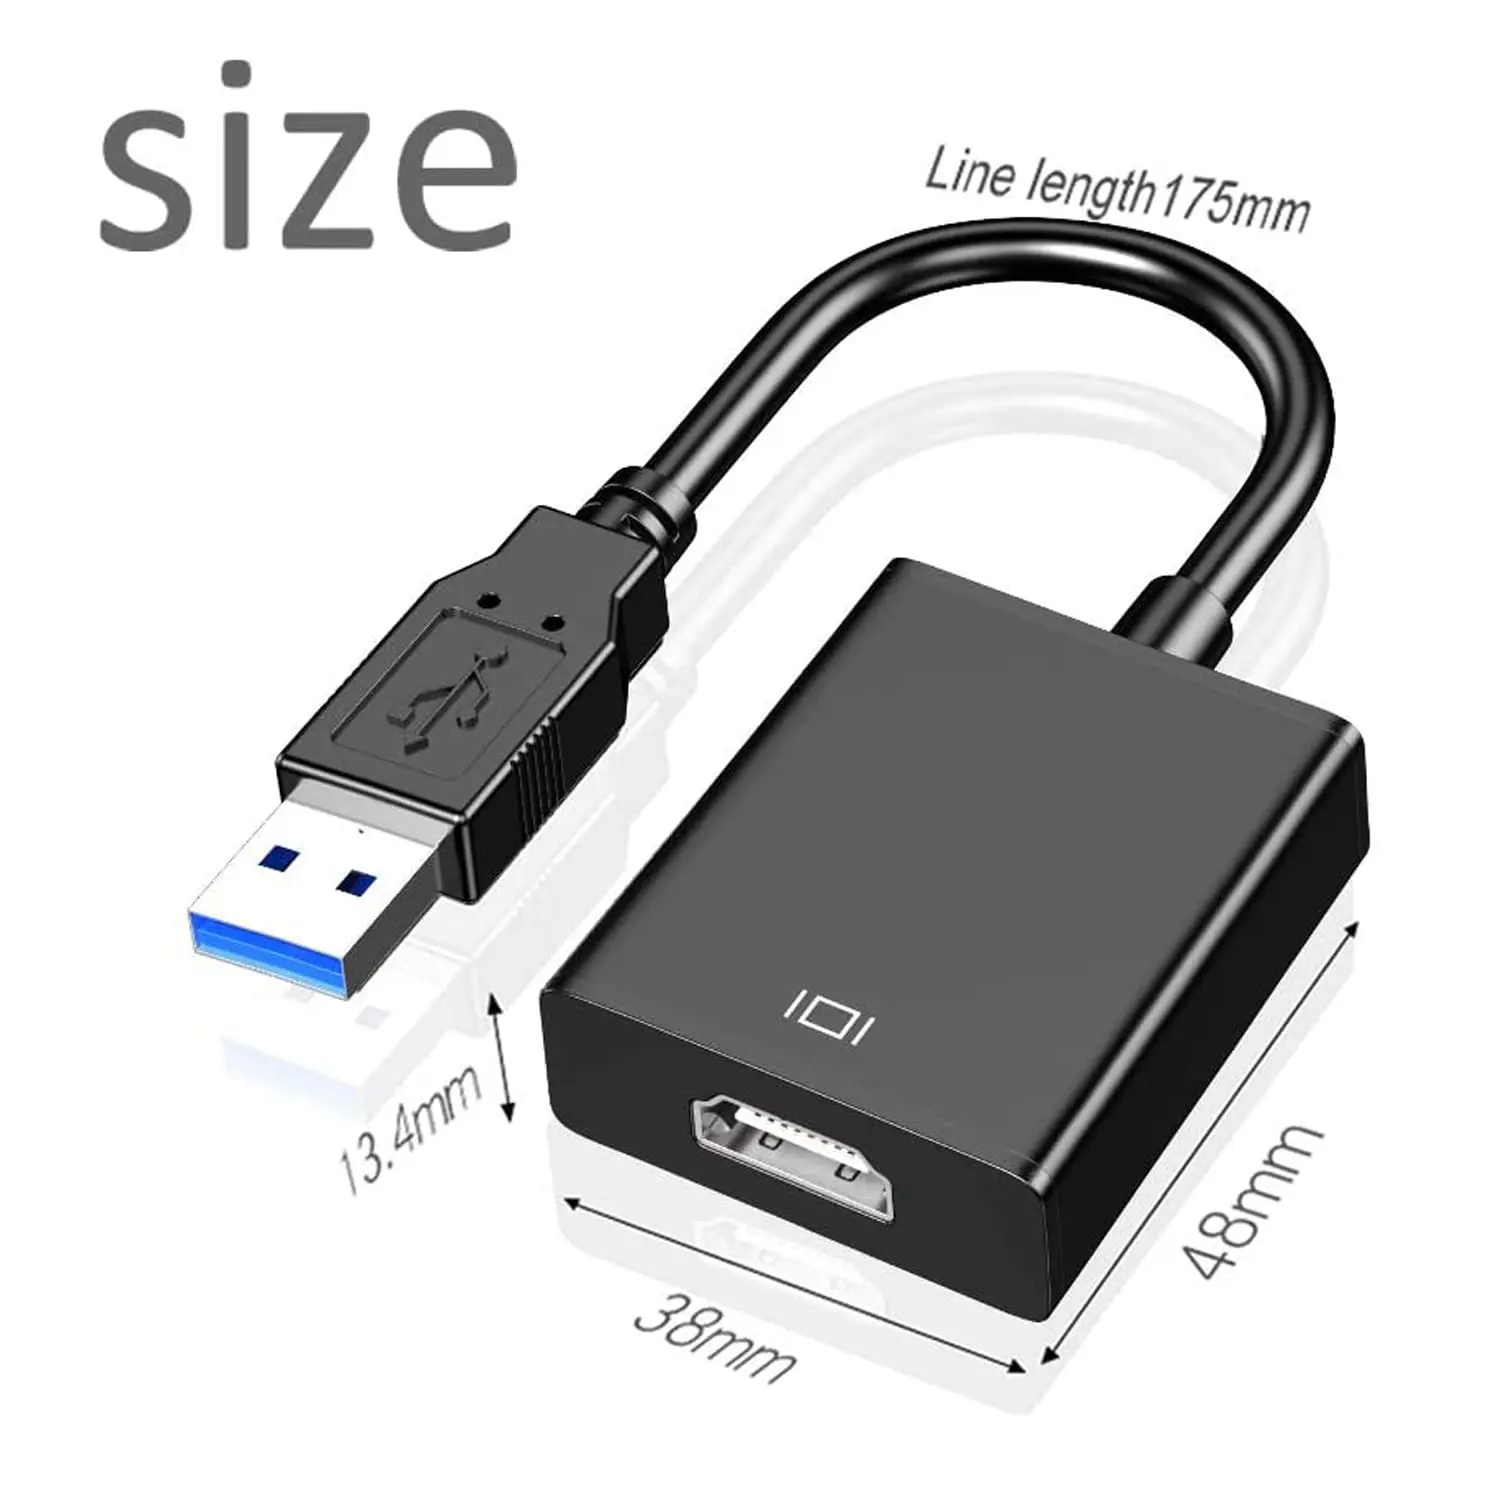 USB to HDMI Adapter USB 3.0/2.0 to HDMI Cable Multi-Display Video Converter- PC Laptop Windows 7 8 10 Desktop Laptop PC Monitor